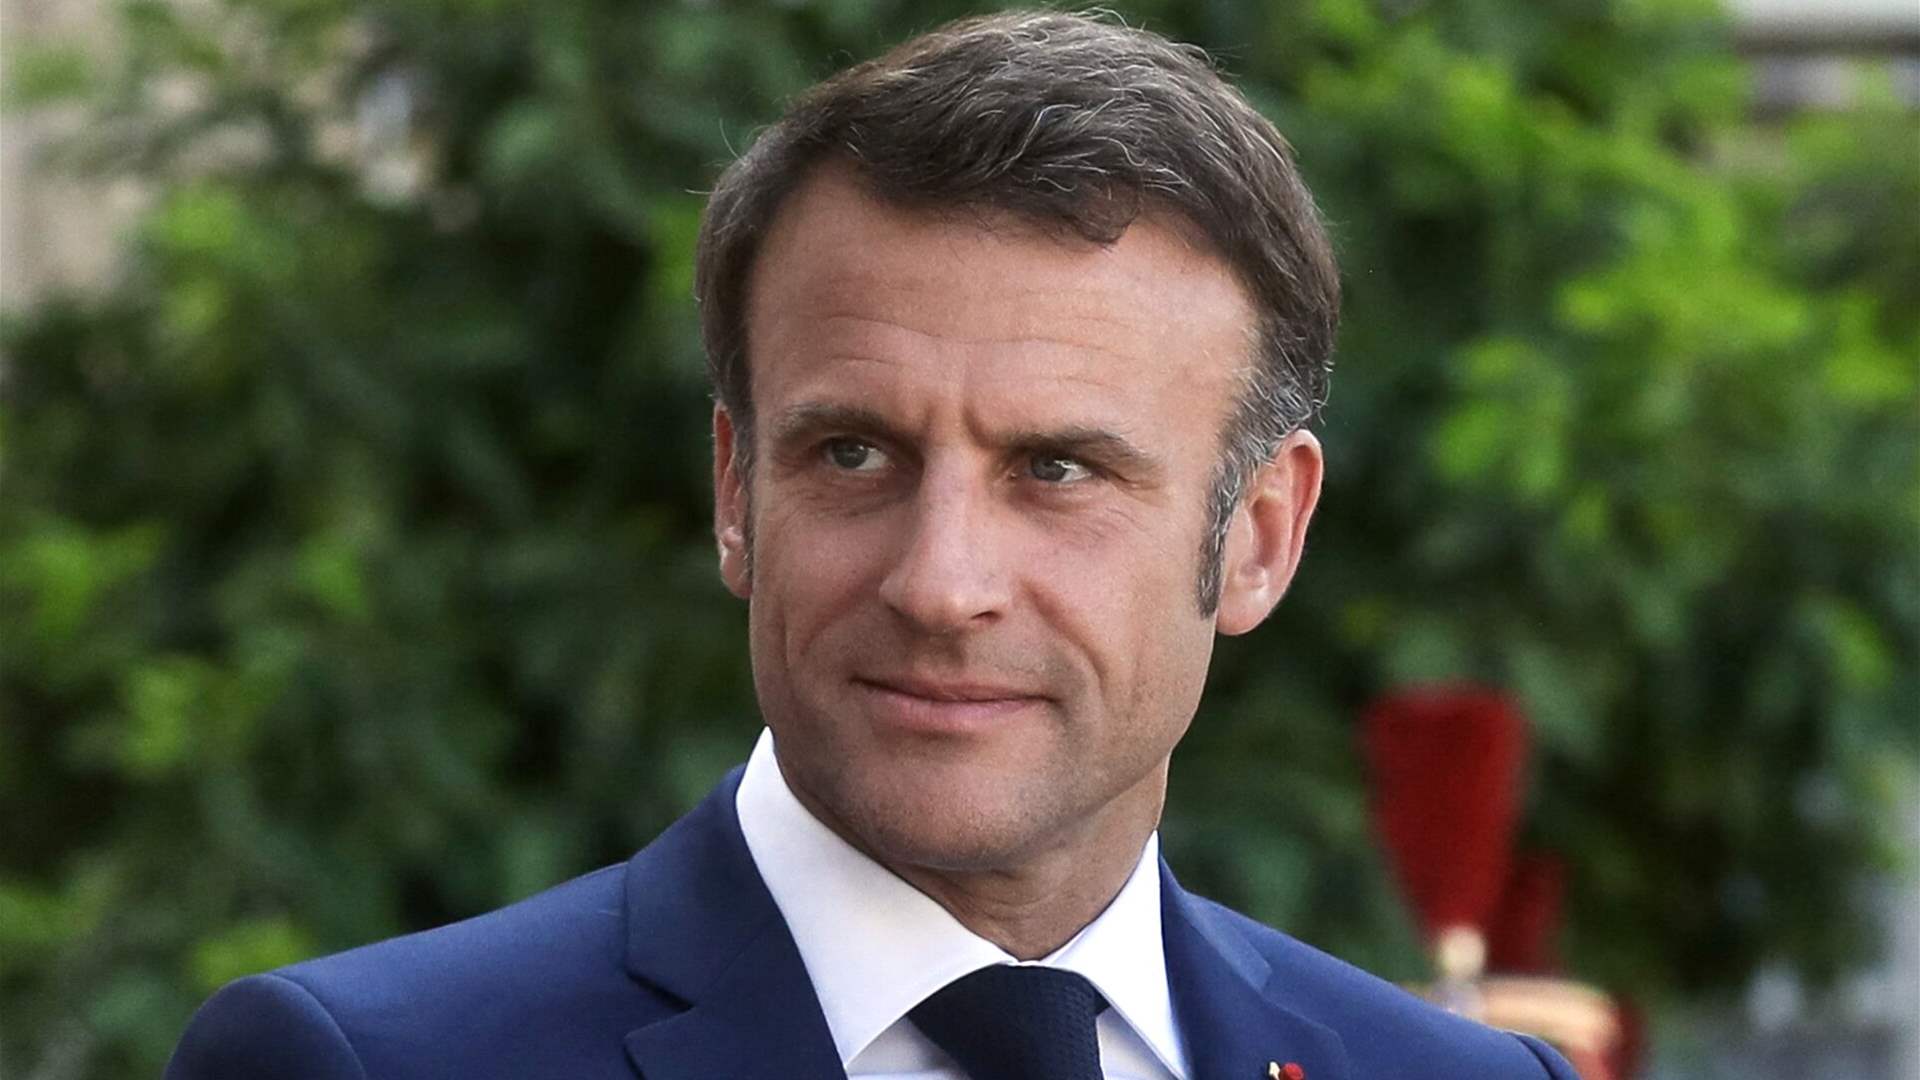 Macron warns Hezbollah and Iran to avoid creating danger in the region